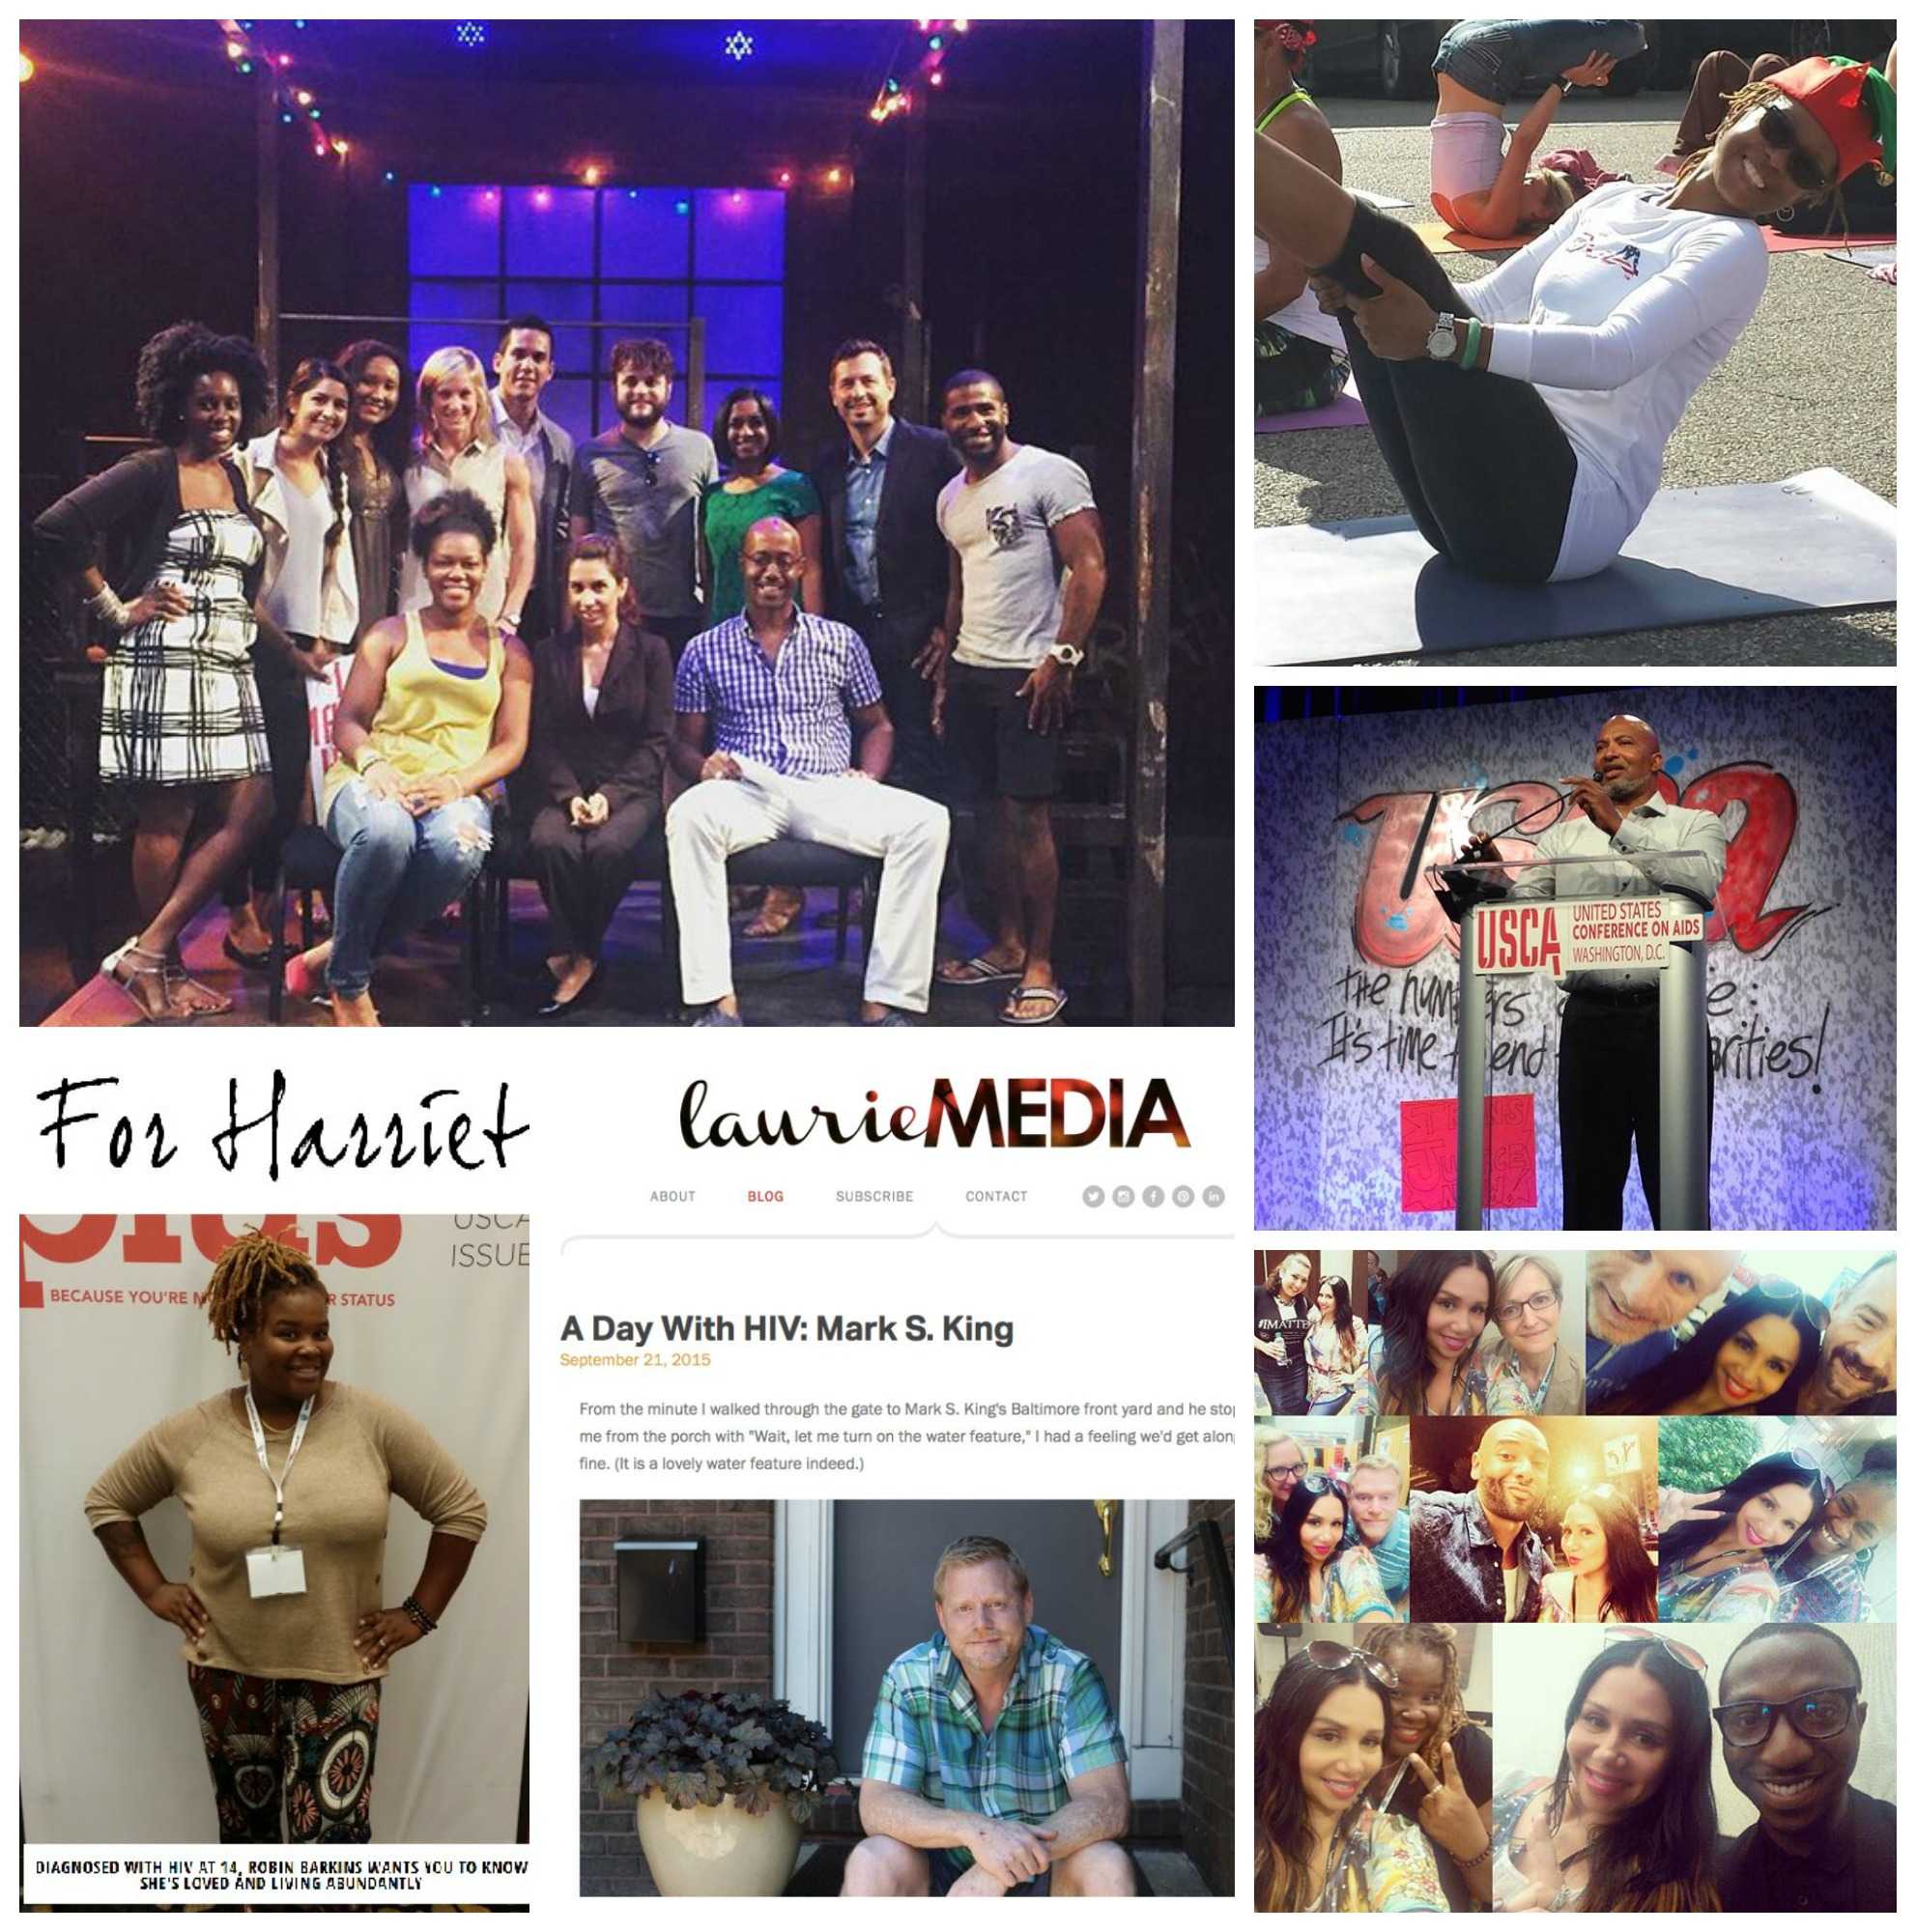 	Collage image of members of the Let’s Stop HIV Together Network. Clockwise from top left: Masonia sitting on stage for a speaker panel with local experts and the cast of RENT following the screening of the show in Atlanta Georgia; Venita doing yoga at an outdoor event; Cedric speaking on stage at the U.S. Conference on AIDS in Washington, D.C.; selfies taken by Maria with friends including other campaign participants Mark, at left center, and Robin at left bottom, as well as participant of the Positive Spin campaign, Guy, at bottom right; screenshot of a blog with a logo that reads “laurieMEDIA” at the top, “A Day With HIV: Mark S. King, September 21, 2015” followed by a picture of Mark sitting in front of the door to a house; screenshot of blog with a logo that reads “For Harriet” followed by a picture of Robin, standing in front of a backdrop for Plus magazine.